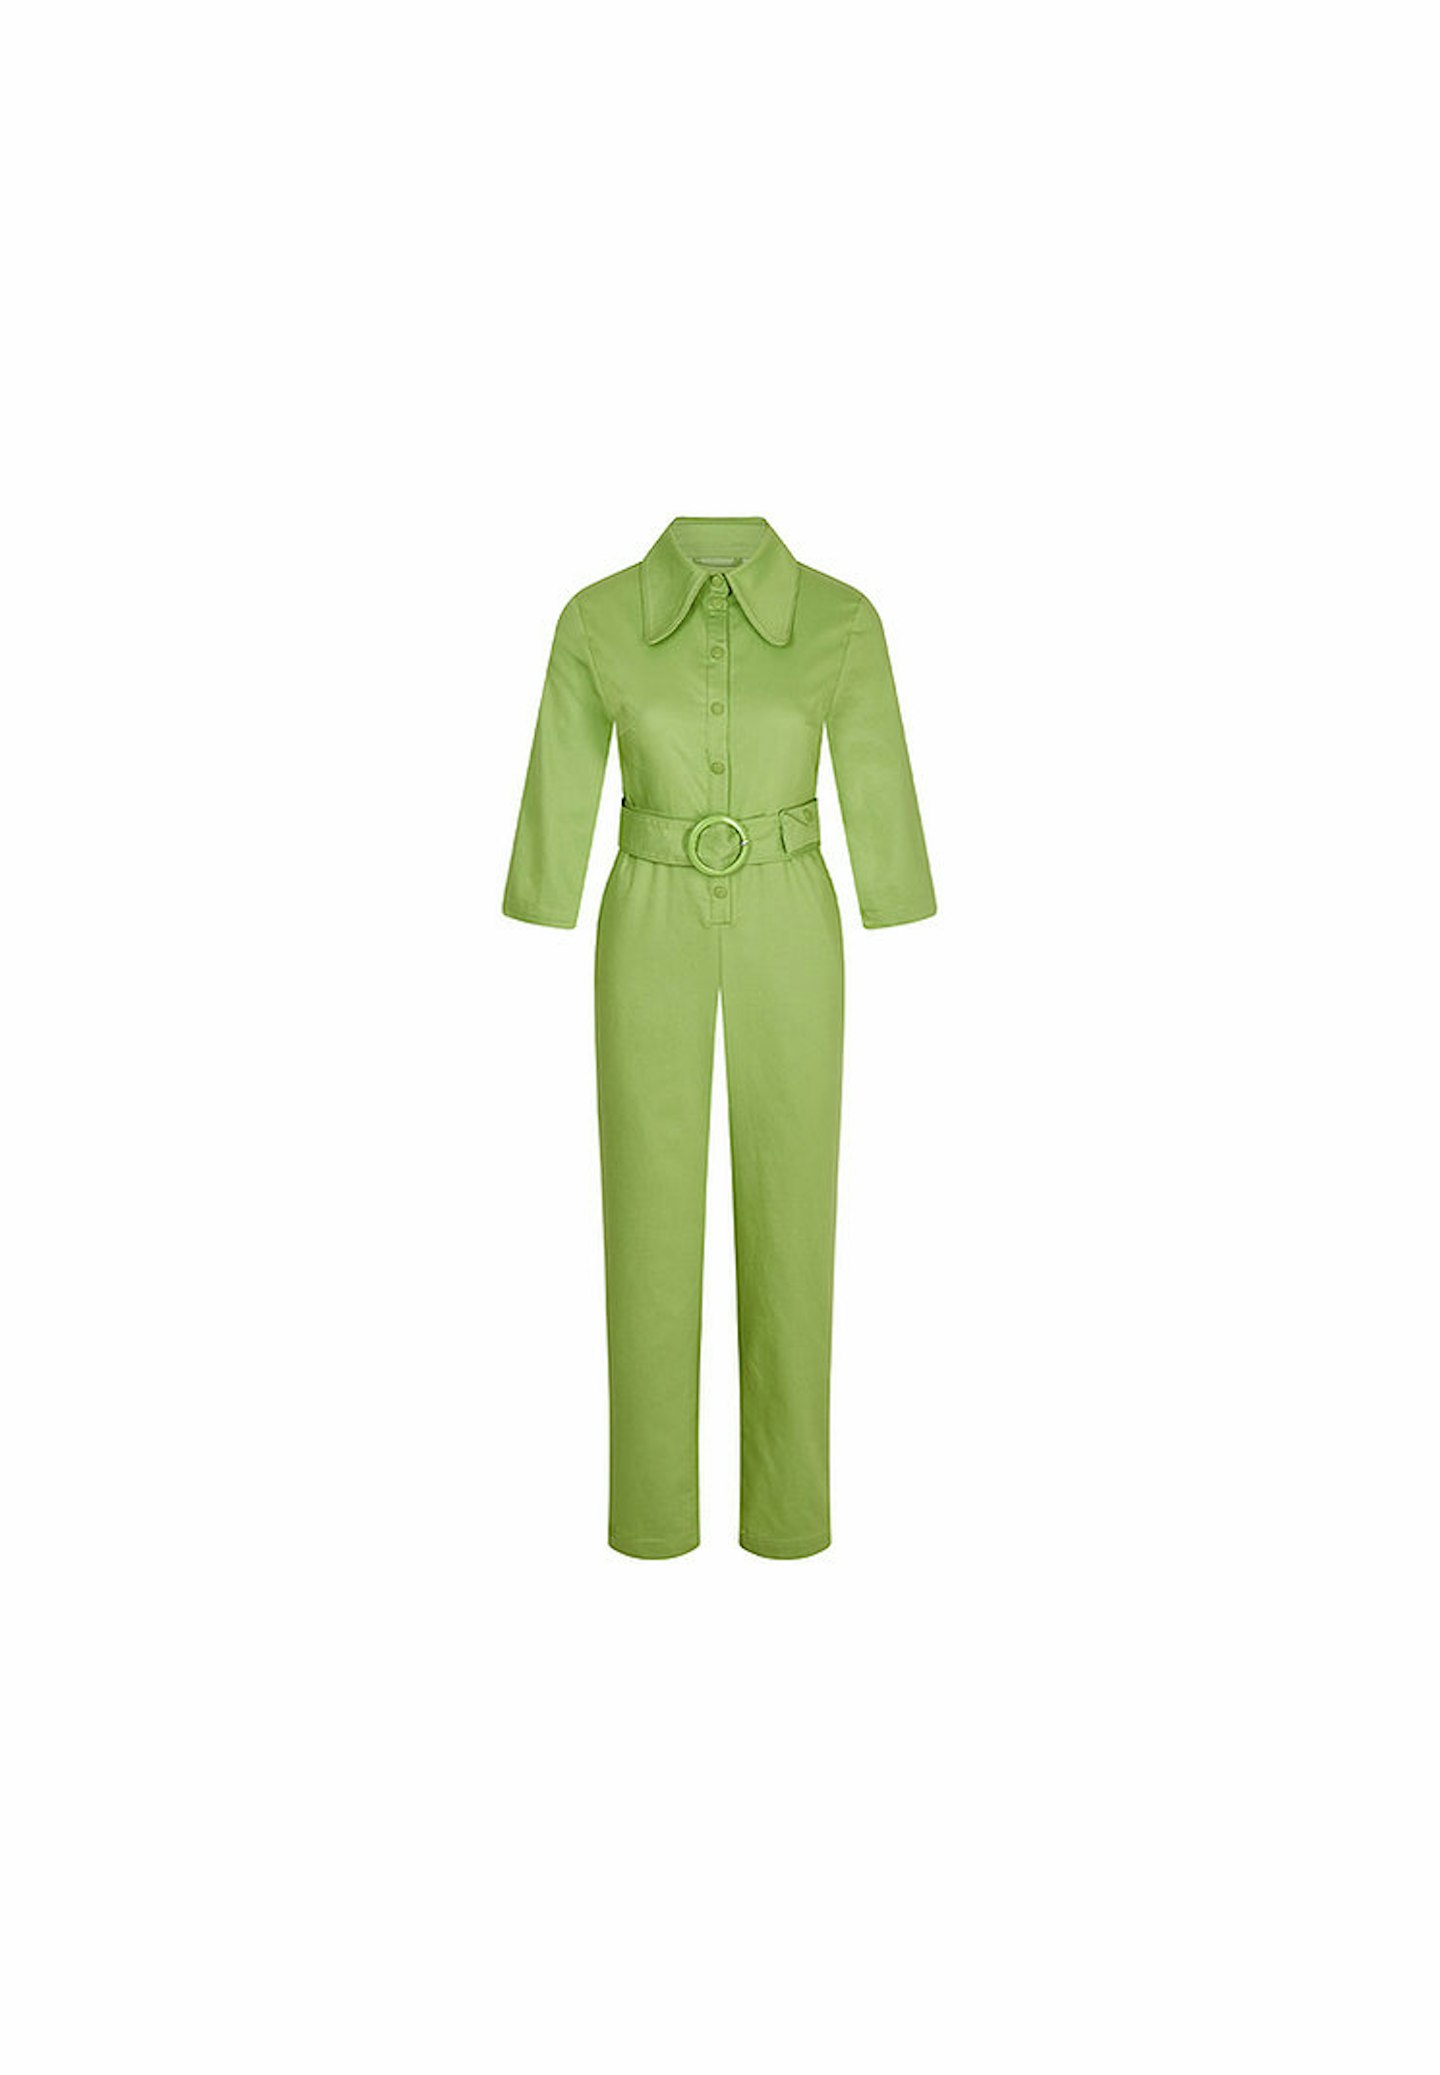 House of Sunny, Green Belted Jumpsuit, £100.80